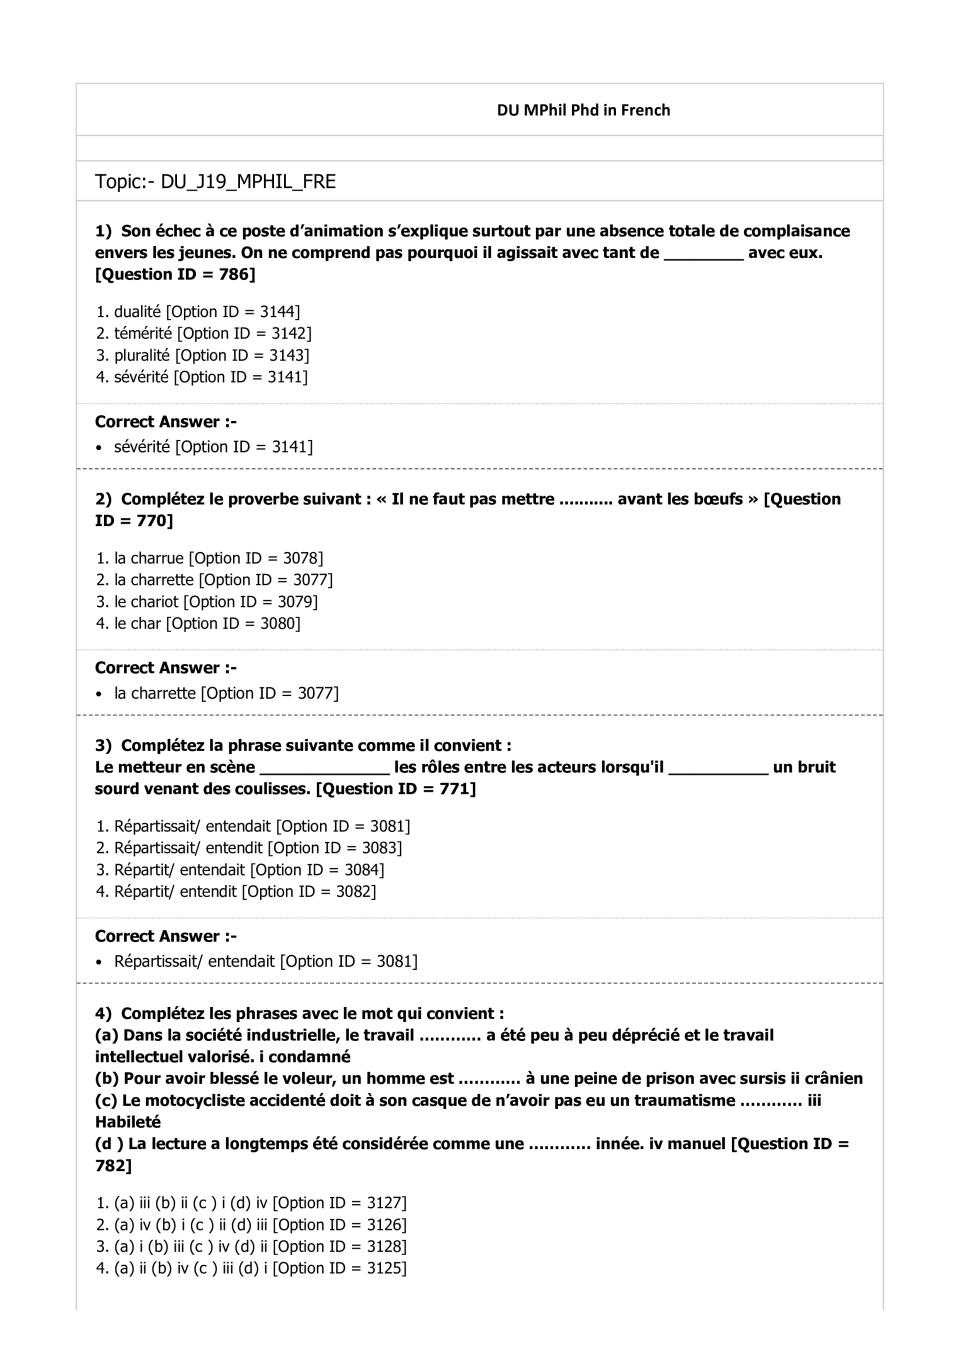 DUET Question Paper 2019 for M.Phil Ph.D French - Page 1